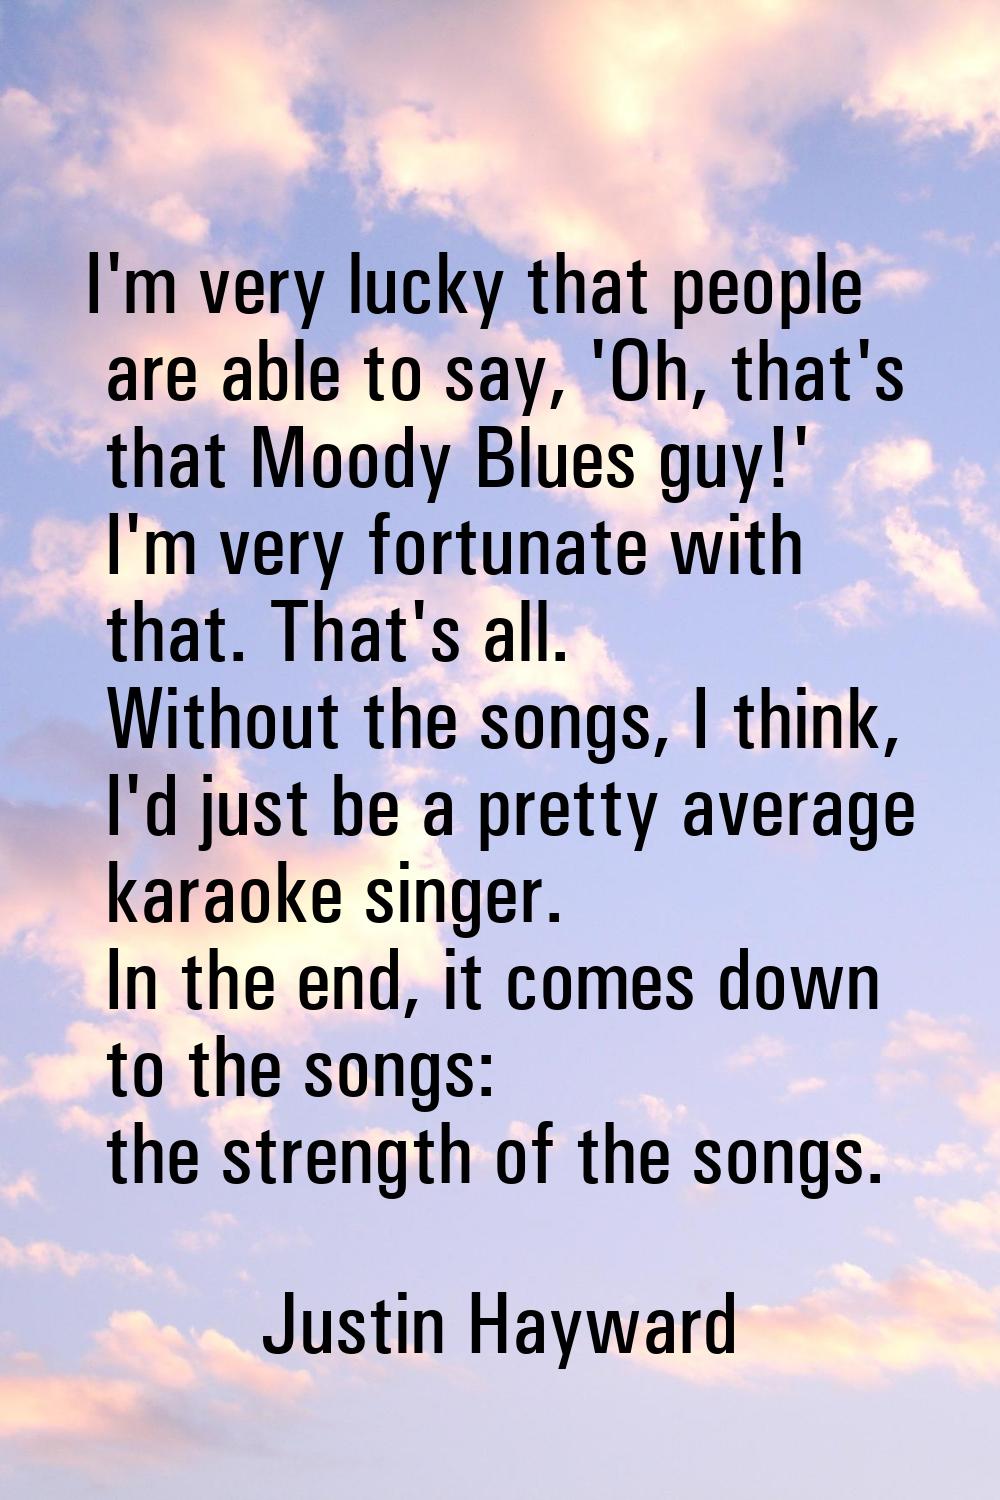 I'm very lucky that people are able to say, 'Oh, that's that Moody Blues guy!' I'm very fortunate w